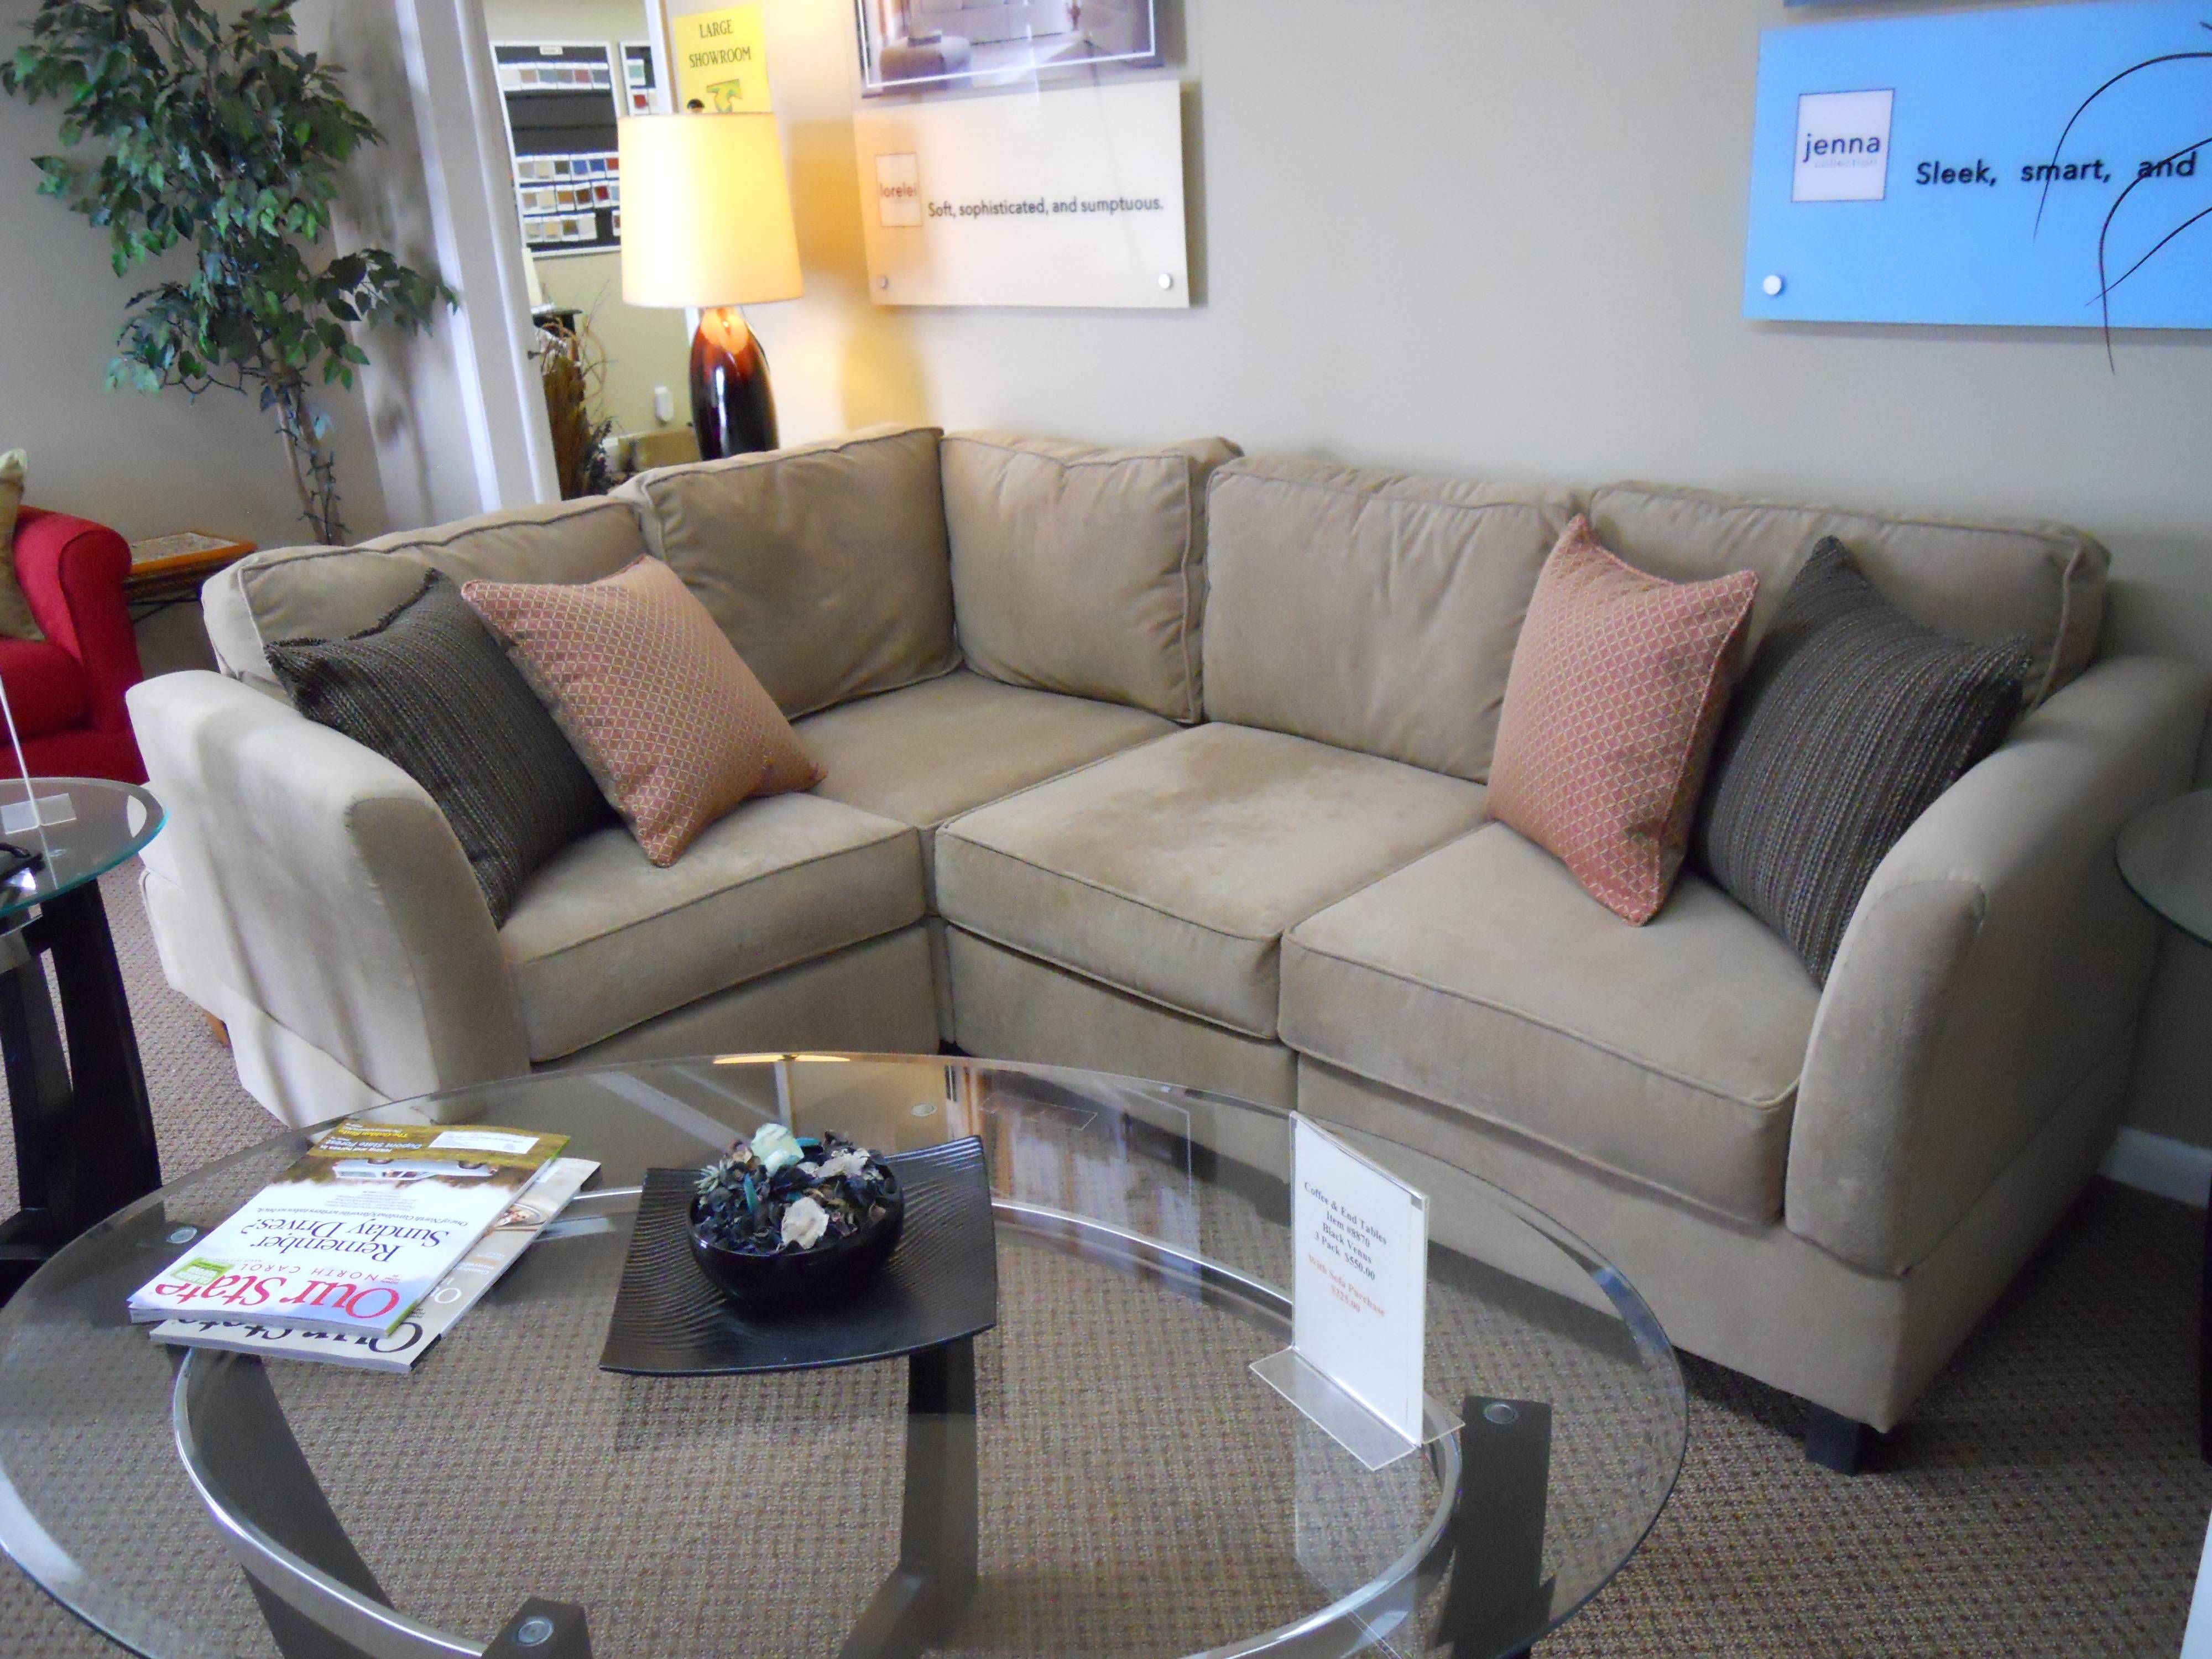 Modular Sectional Sofas Small Scale | Centerfieldbar For Small Scale Sectional Sofas (View 2 of 15)